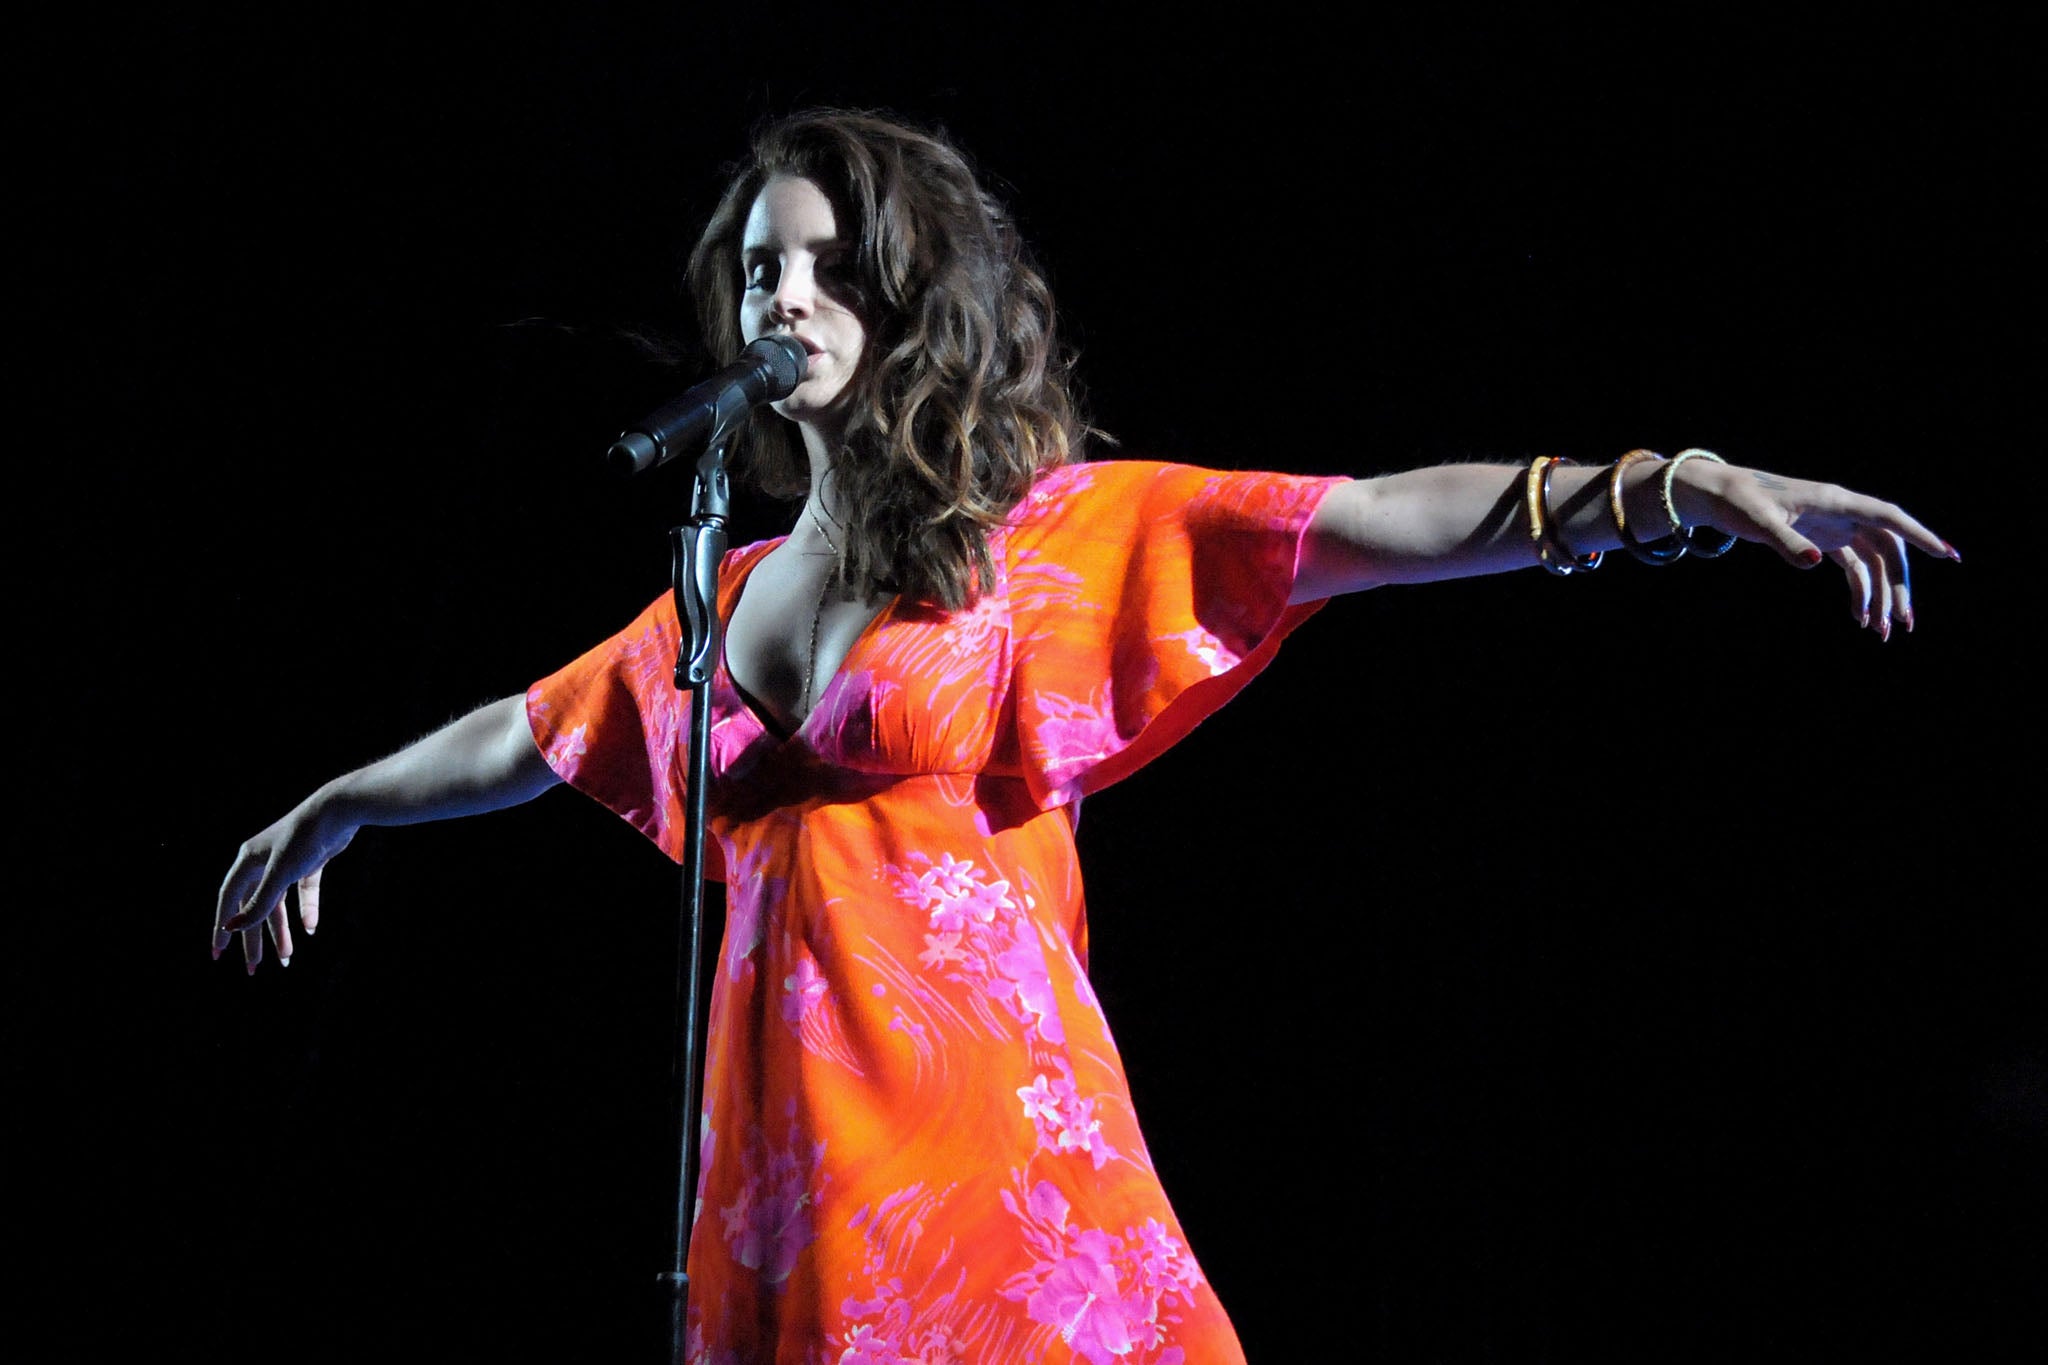 Lana Del Rey is busy working on the follow-up to 2015's Honeymoon